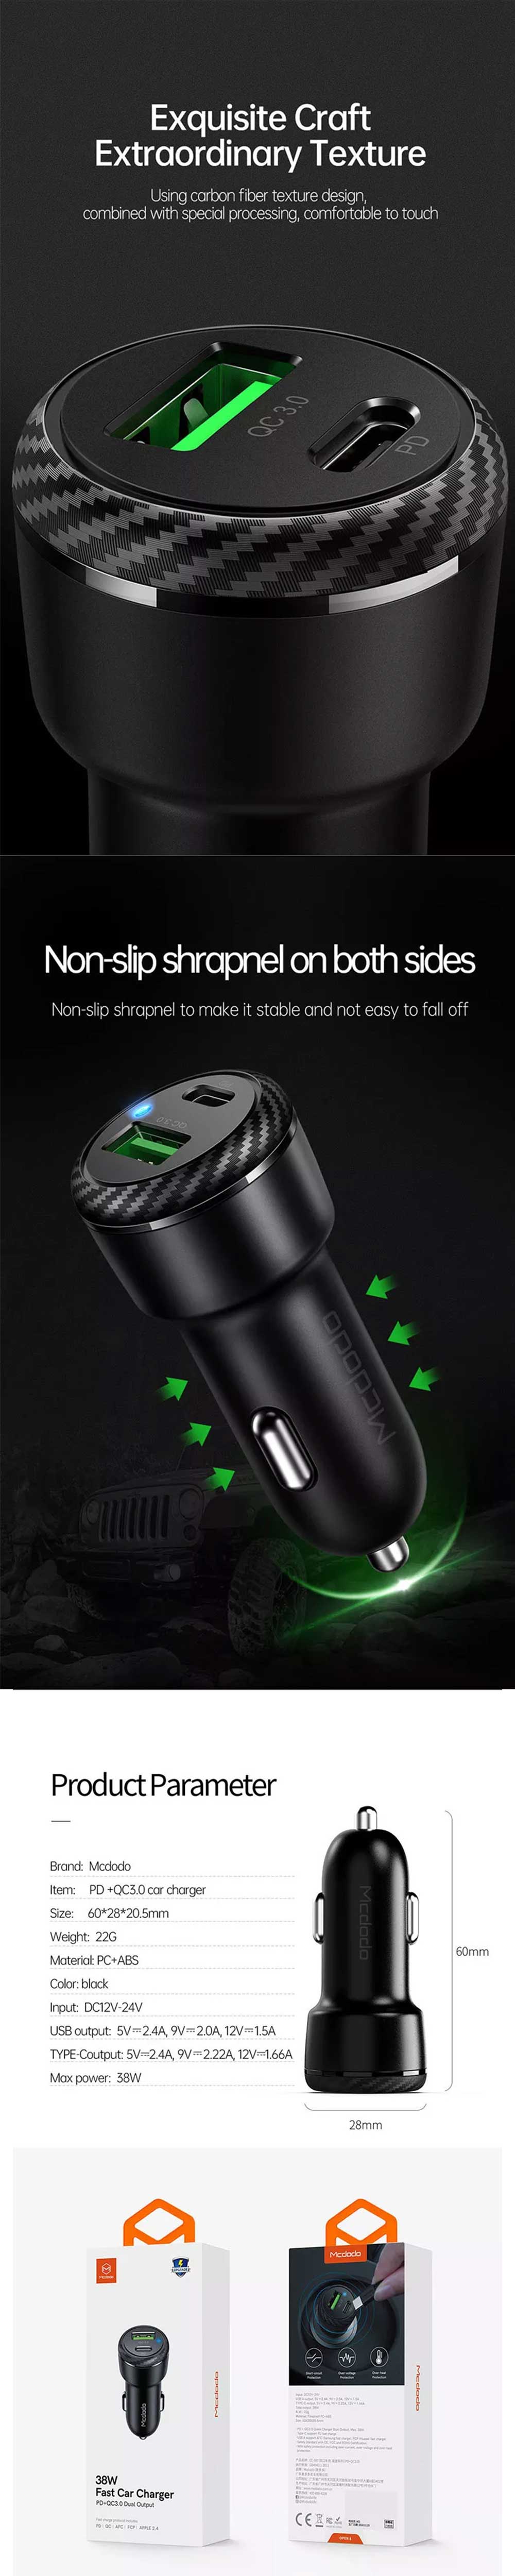 Mcdodo 38W PDQC3 Fast Car Charger 5